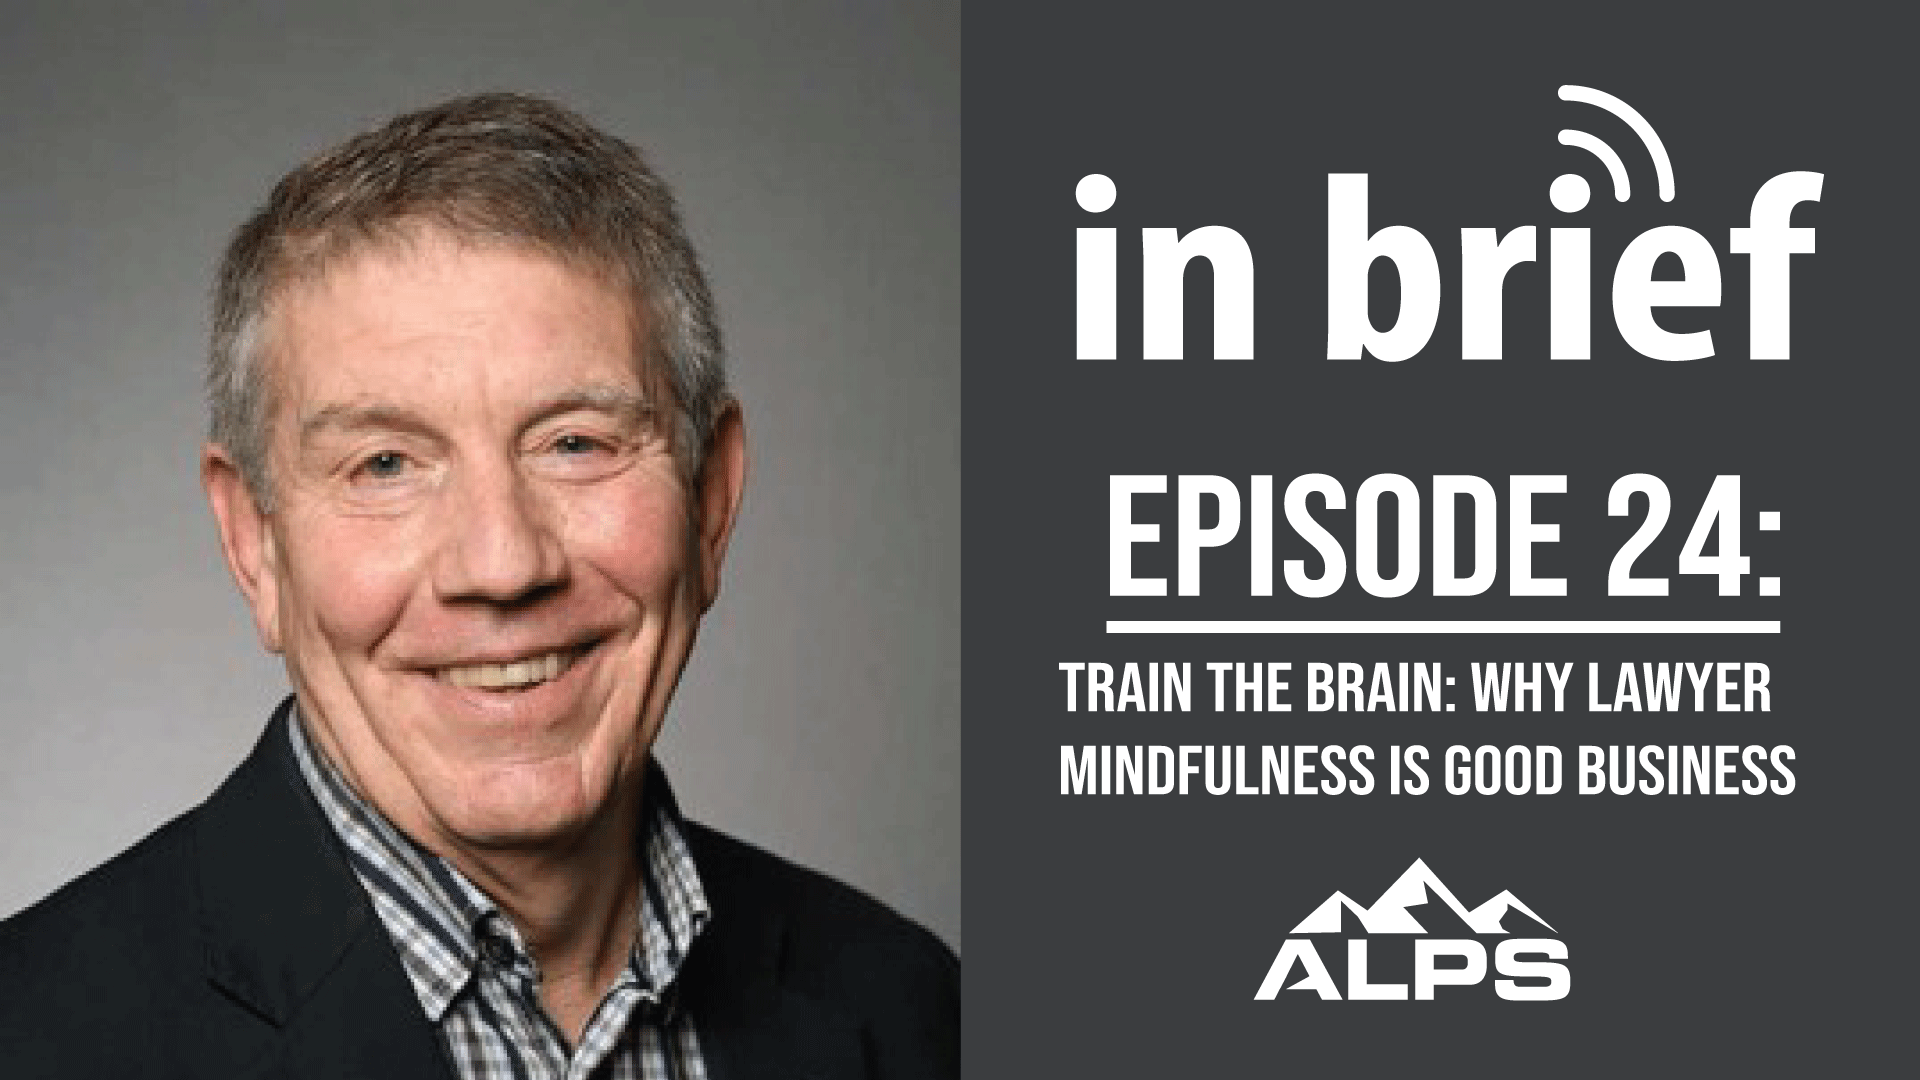 ALPS In Brief Podcast – Episode 24: Train the Brain: Why Lawyer Mindfulness is Good Business